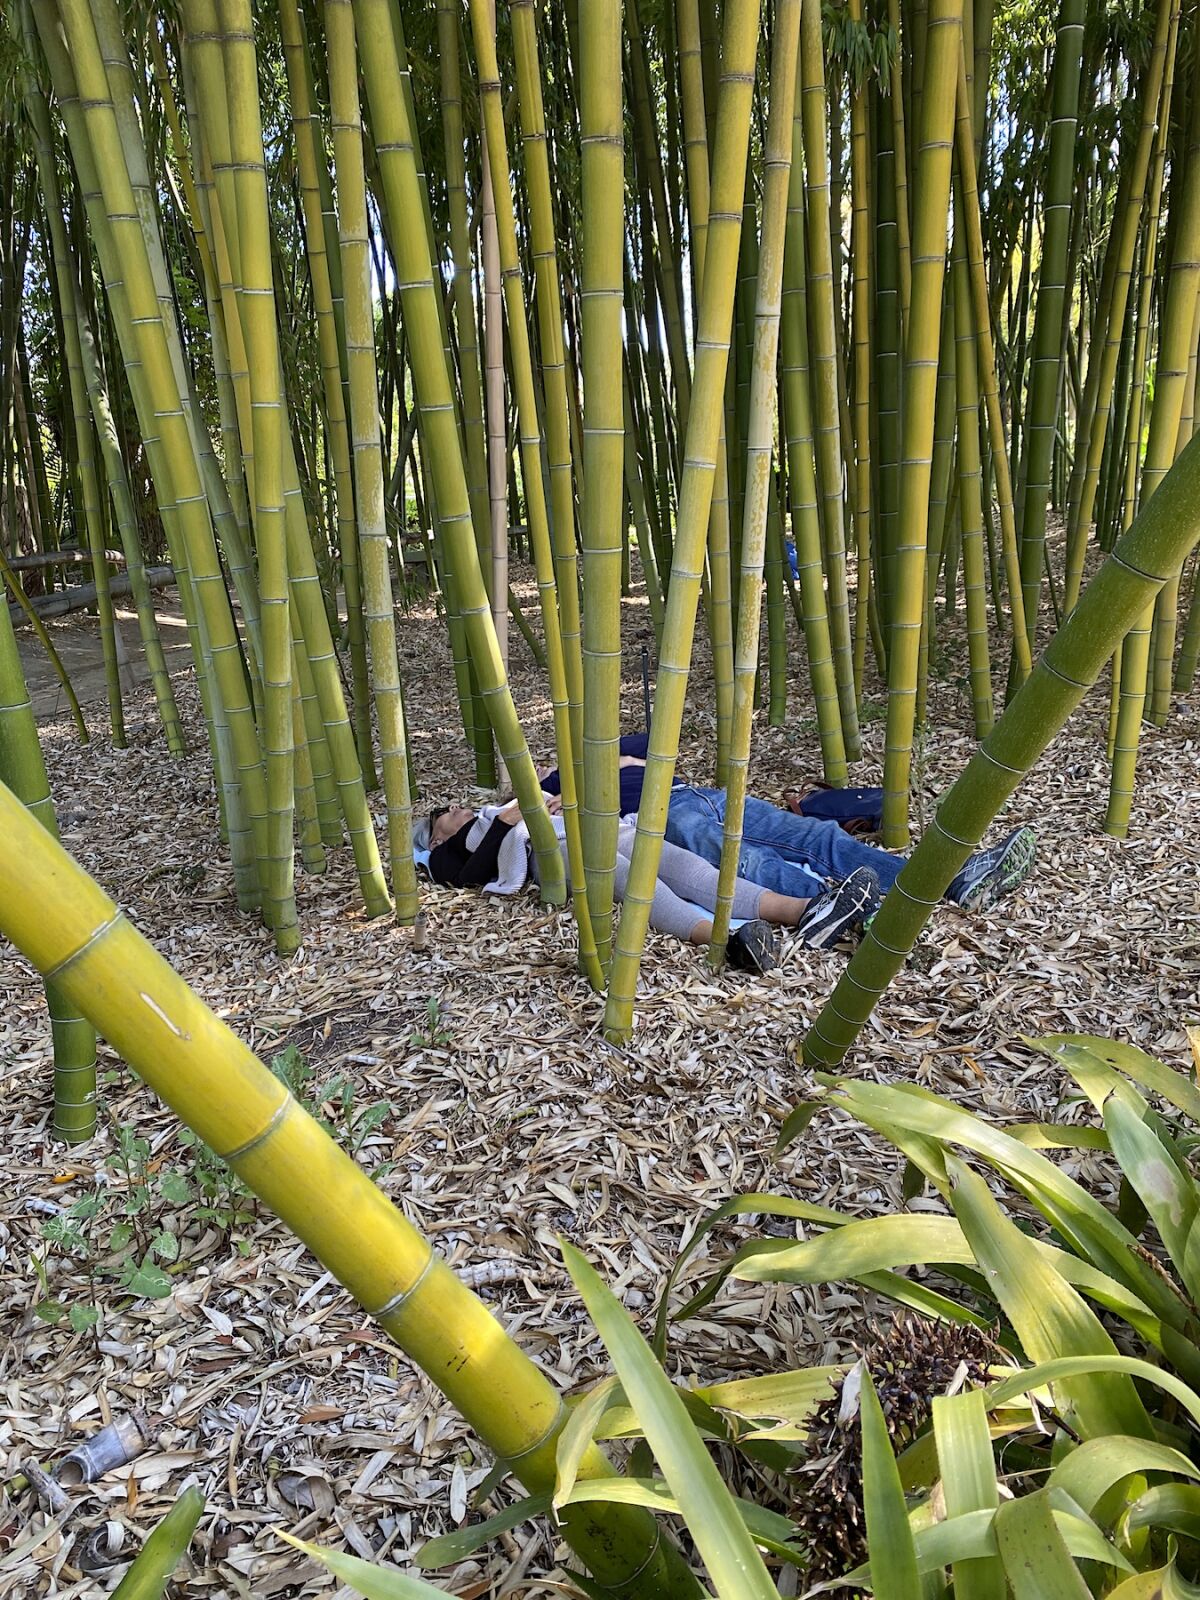 Forest Bathing option: enjoying the Bamboo Forest from the ground up.